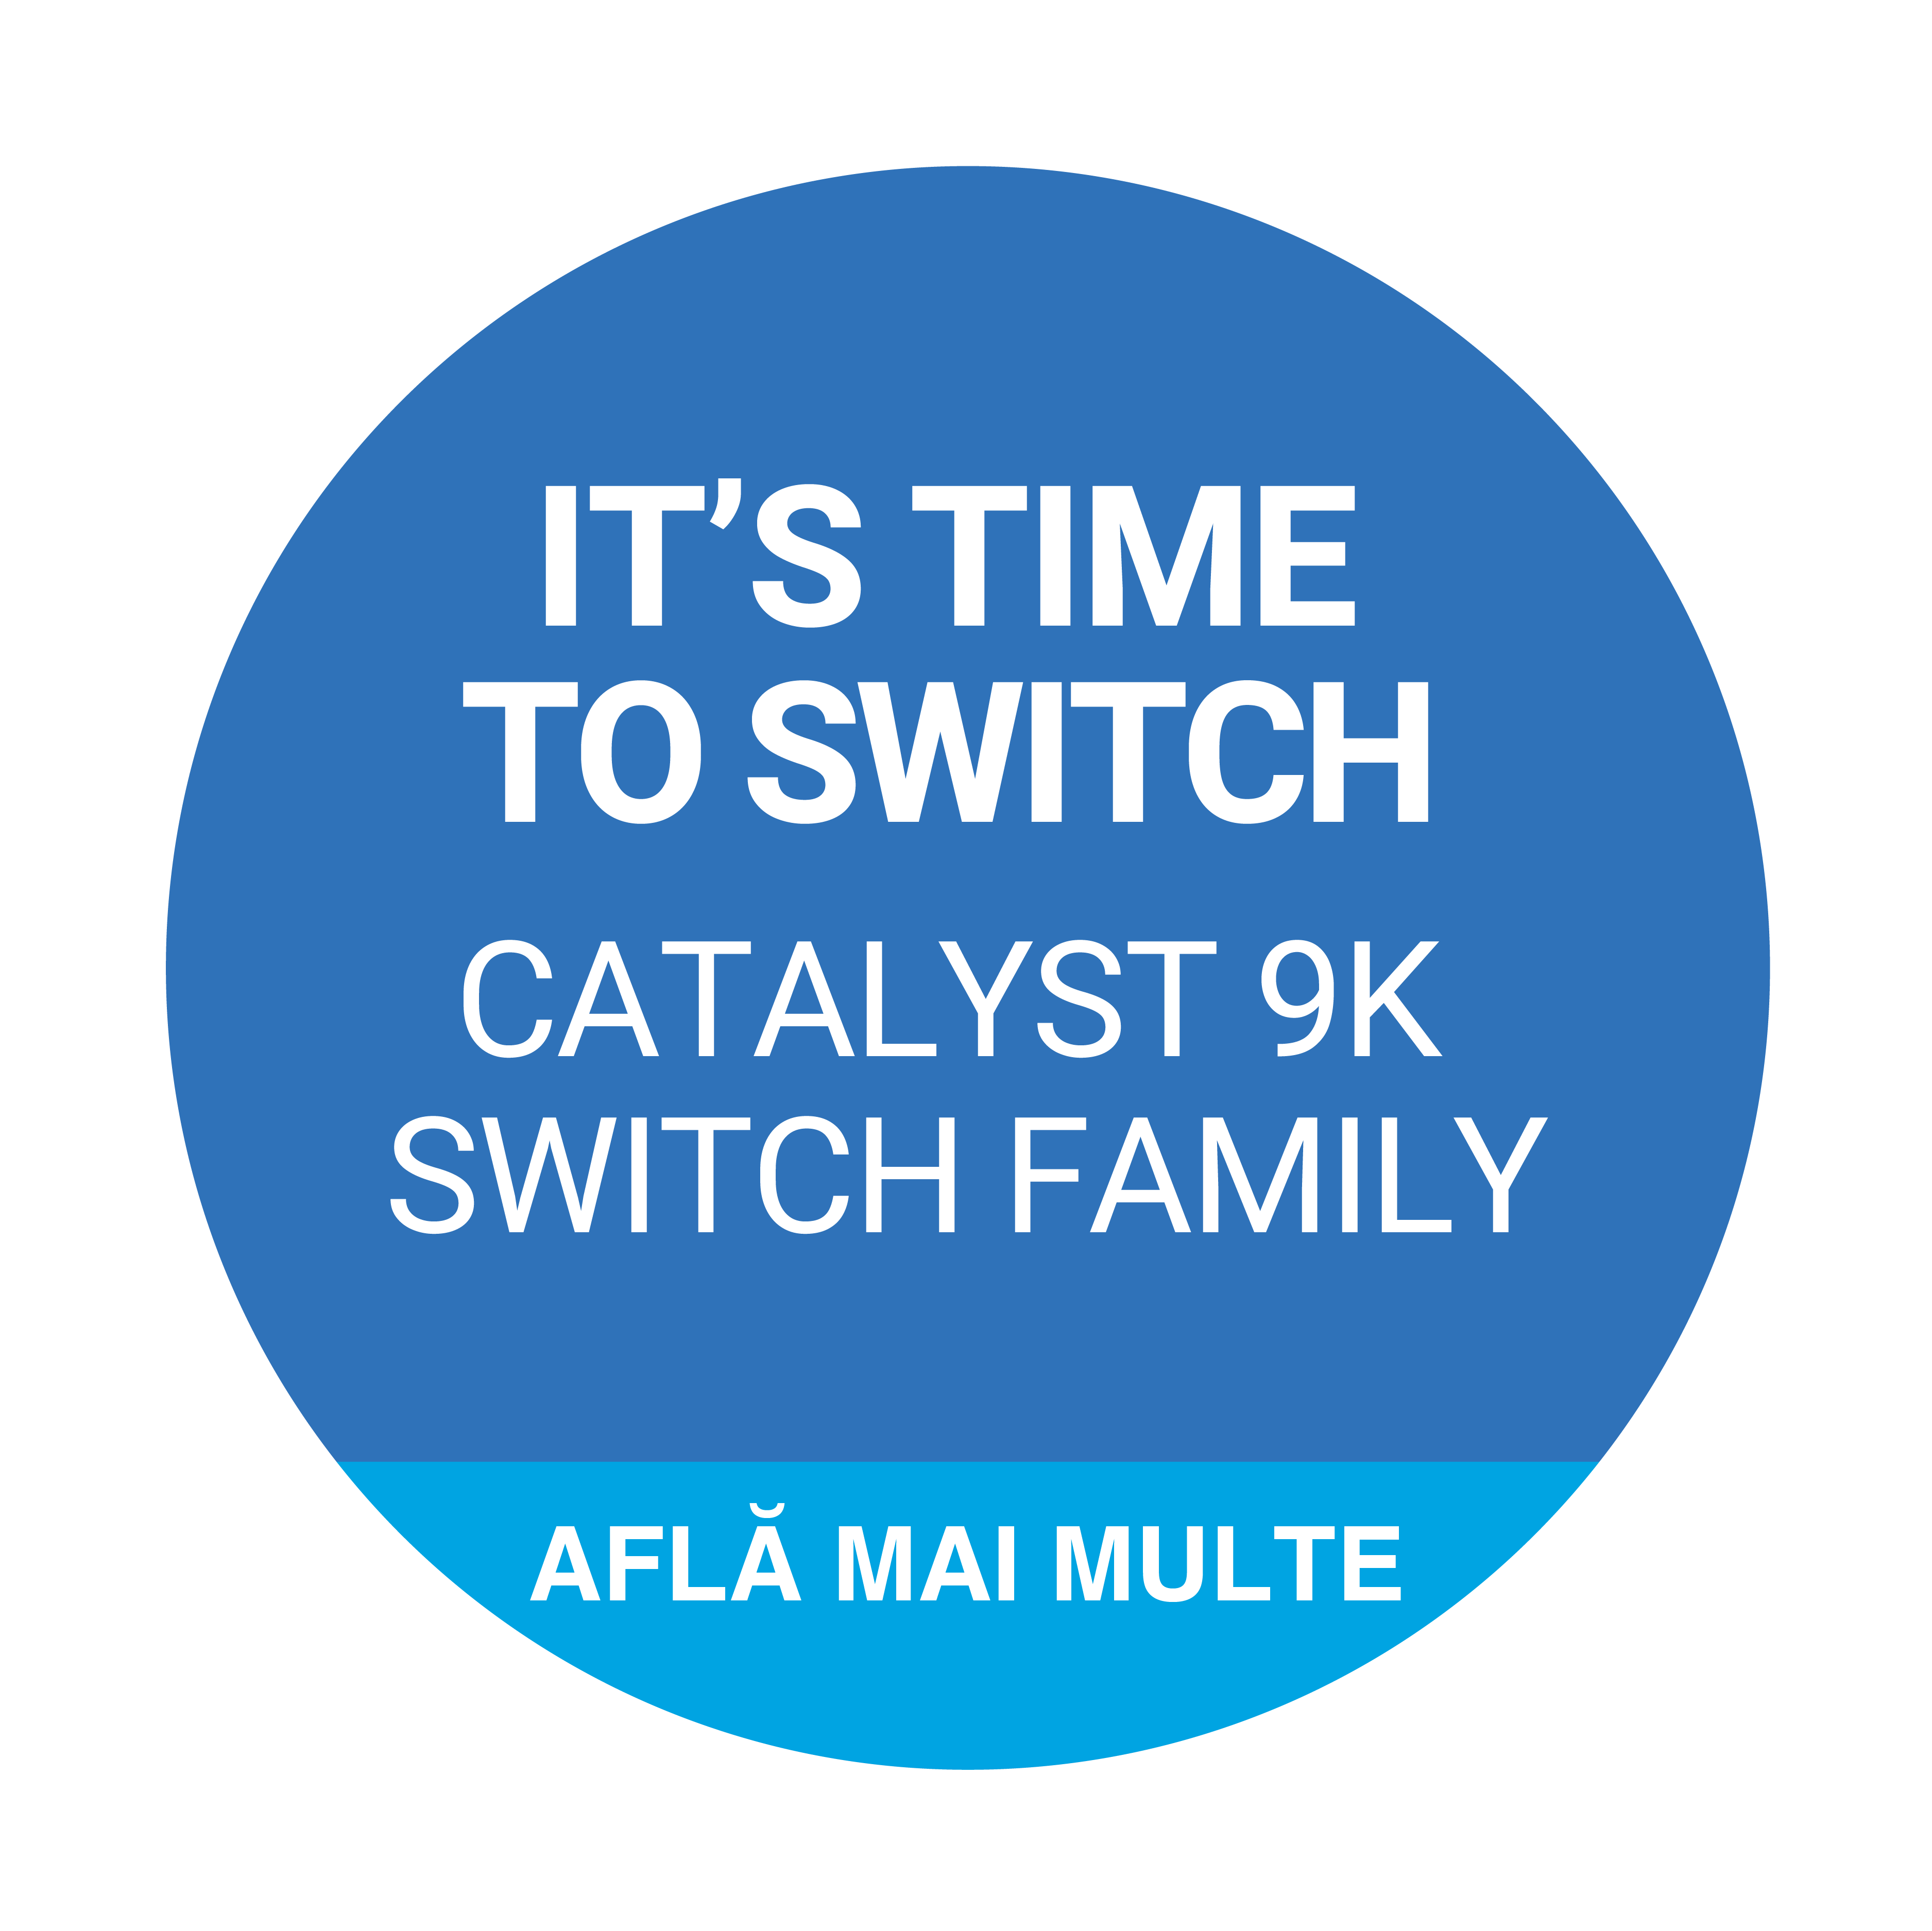 IT’S TIME. TO SWITCH. CATALYST 9K SWITCH FAMILY